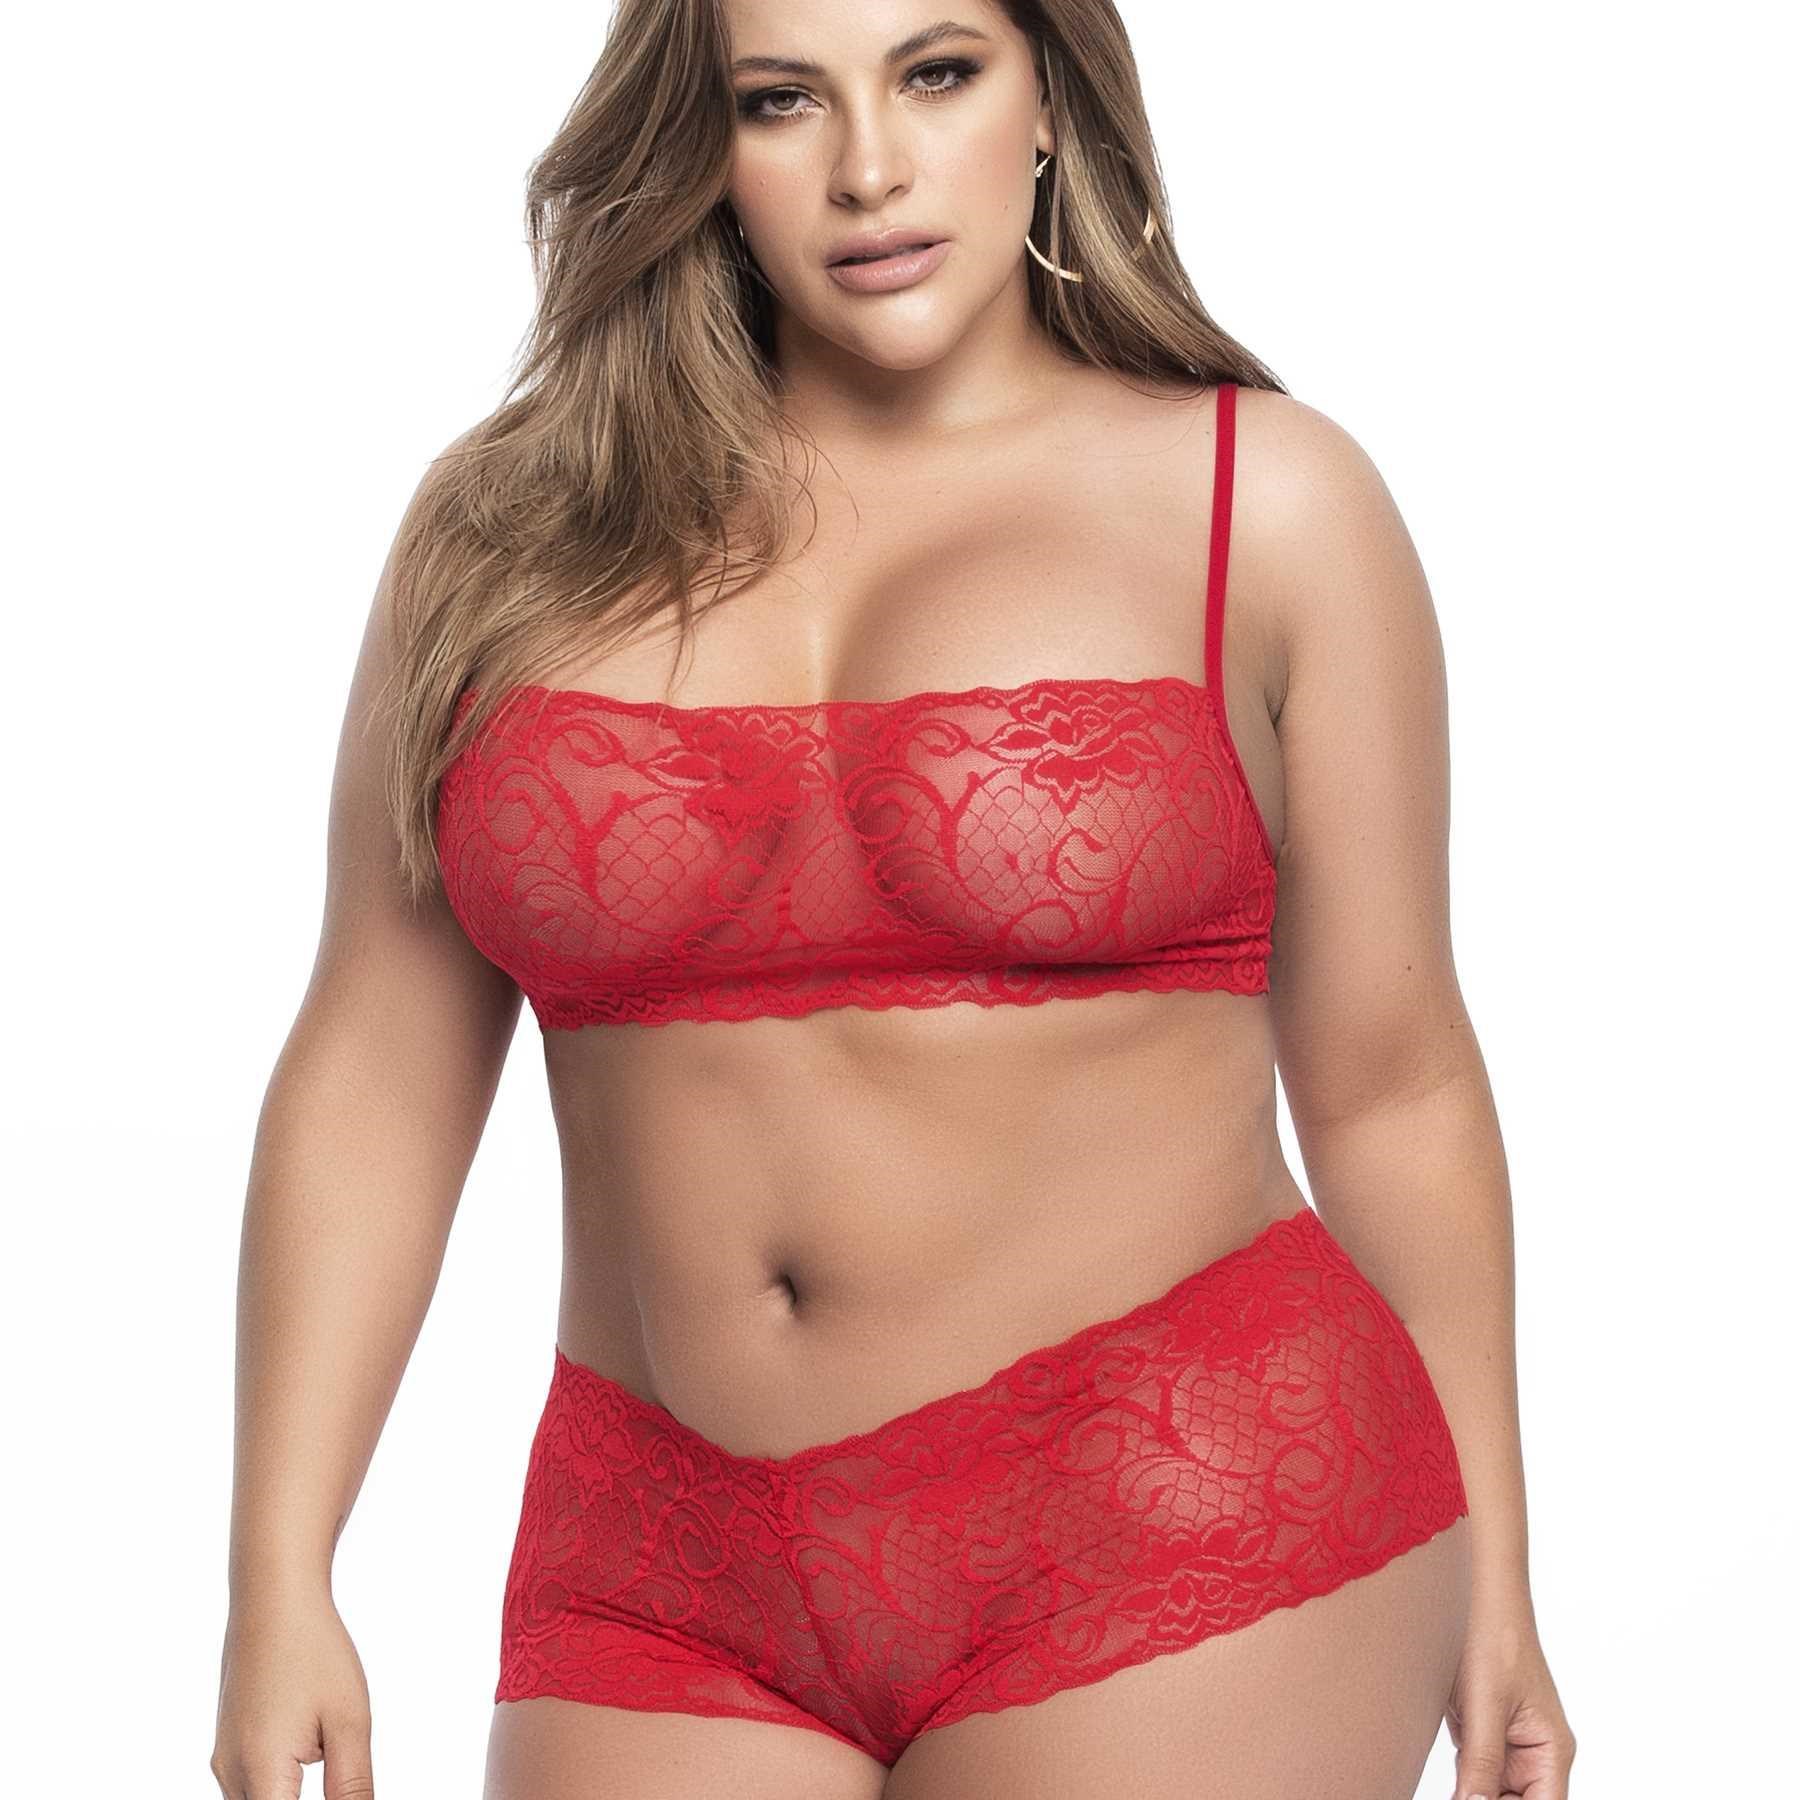 Lace Essentials - Panty & top lace sets qos  front red